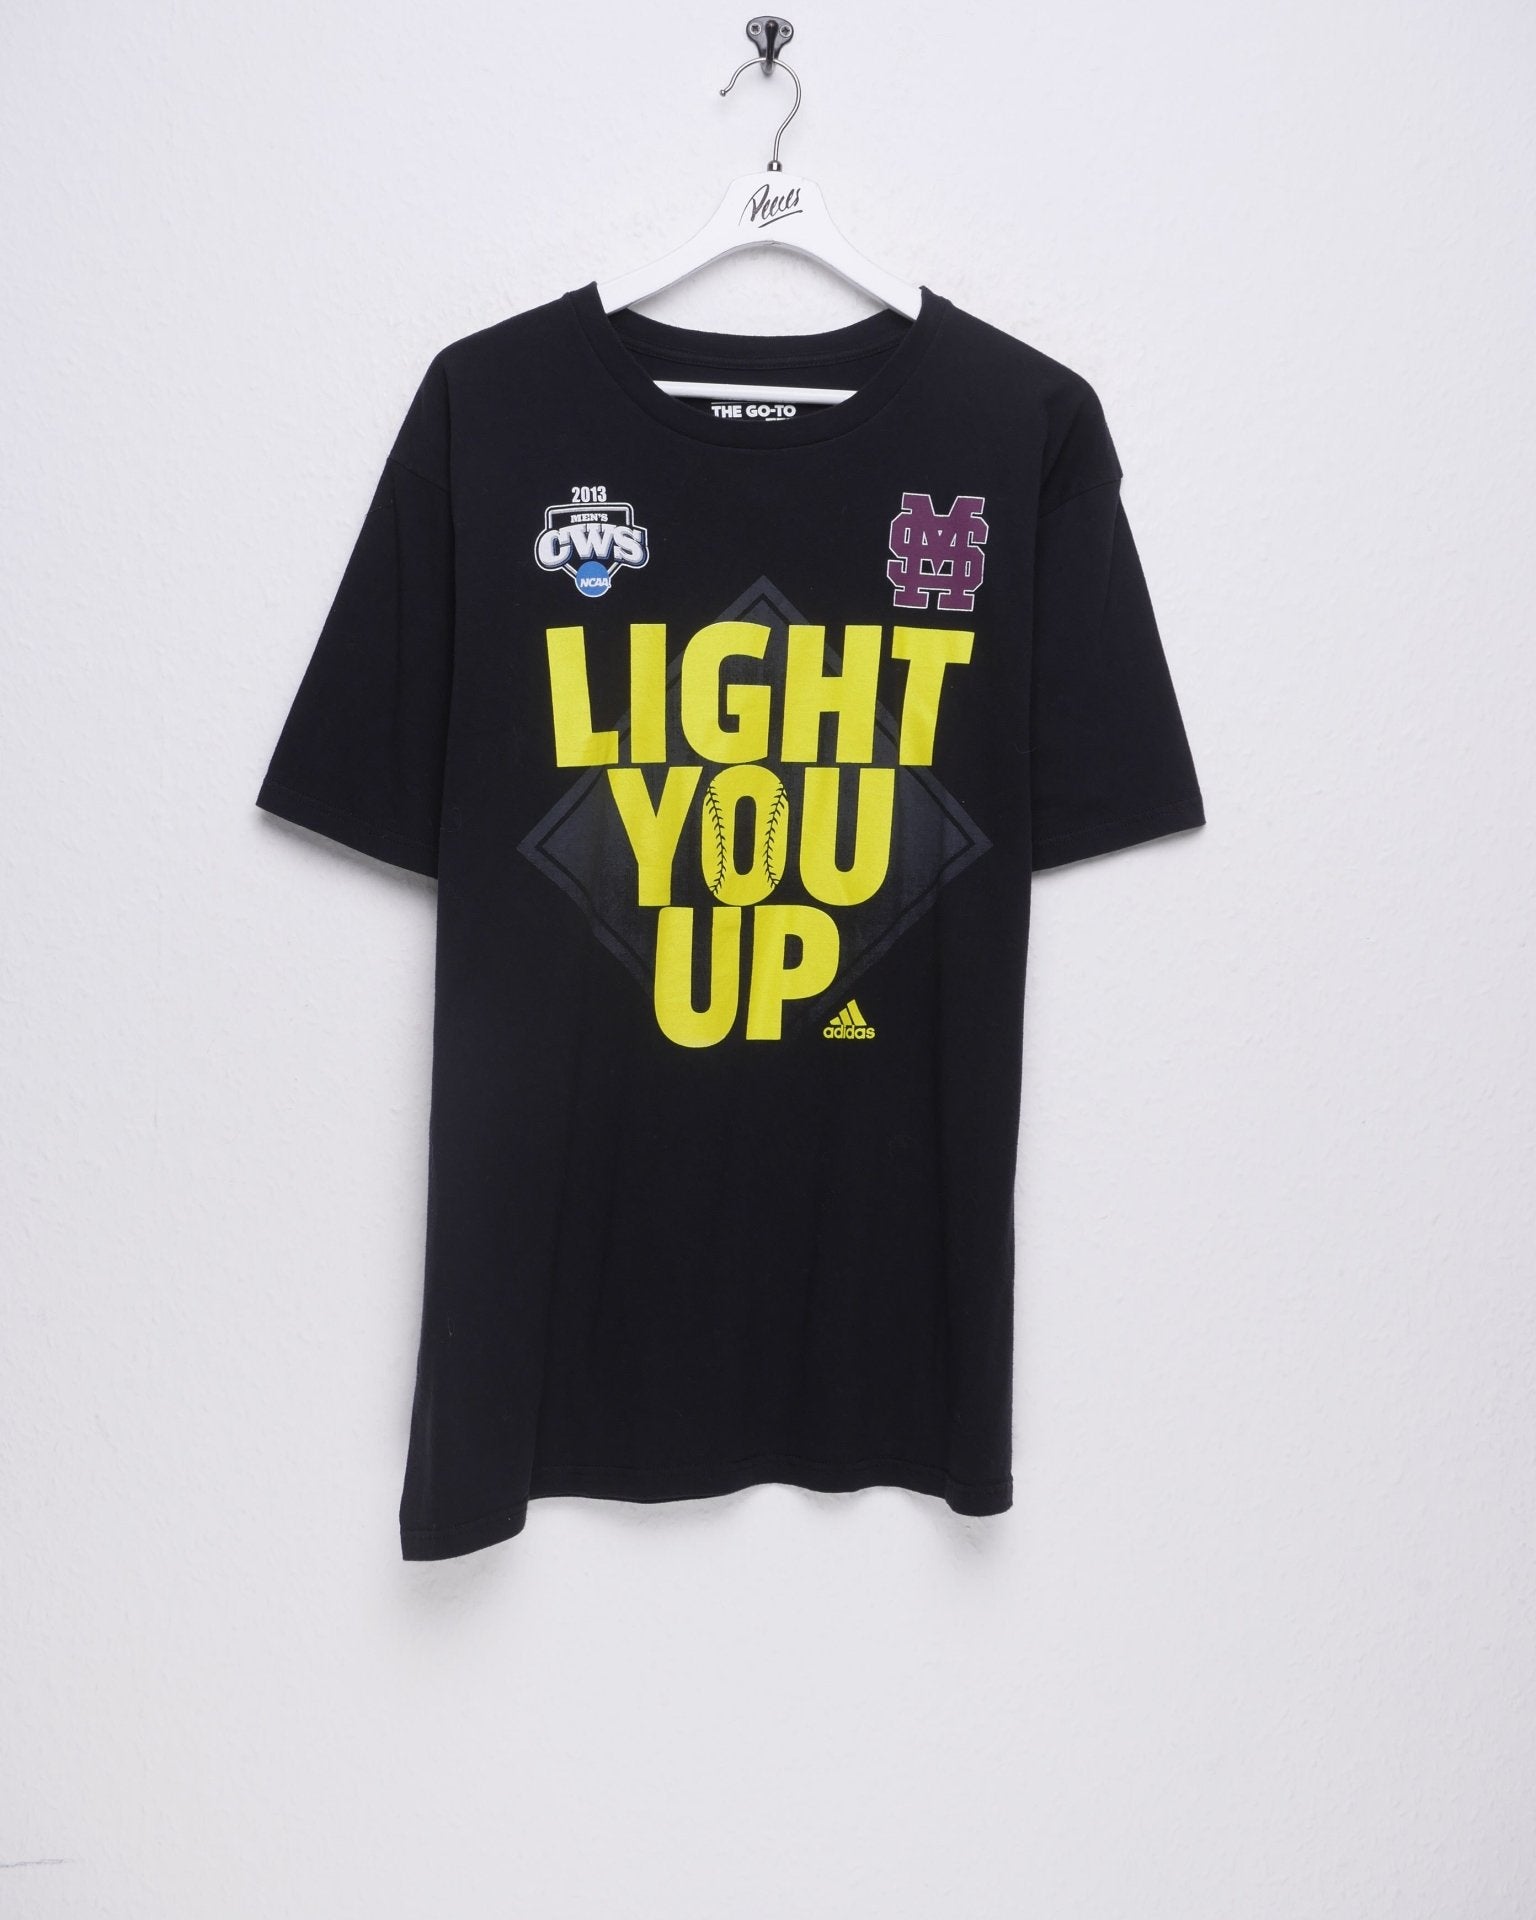 Adidas printed Light You Up Spellout Vintage Shirt - Peeces